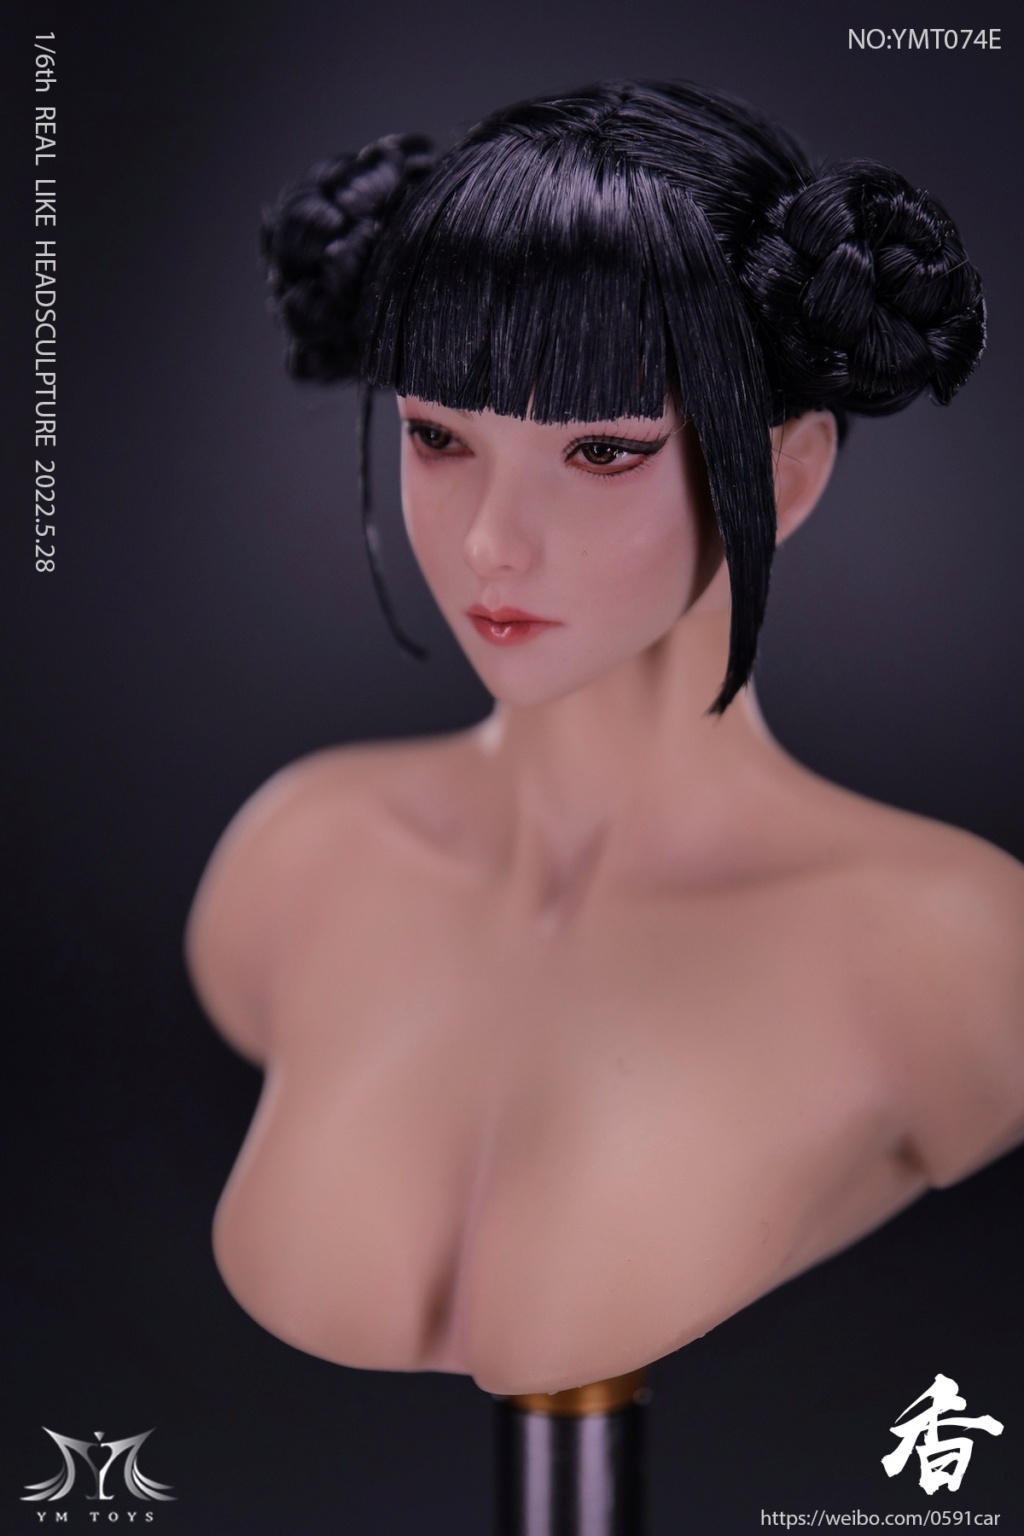 accessory - NEW PRODUCT: YMTOYS: 1/6 YMT074 Cool Female Head Sculpt 14502910